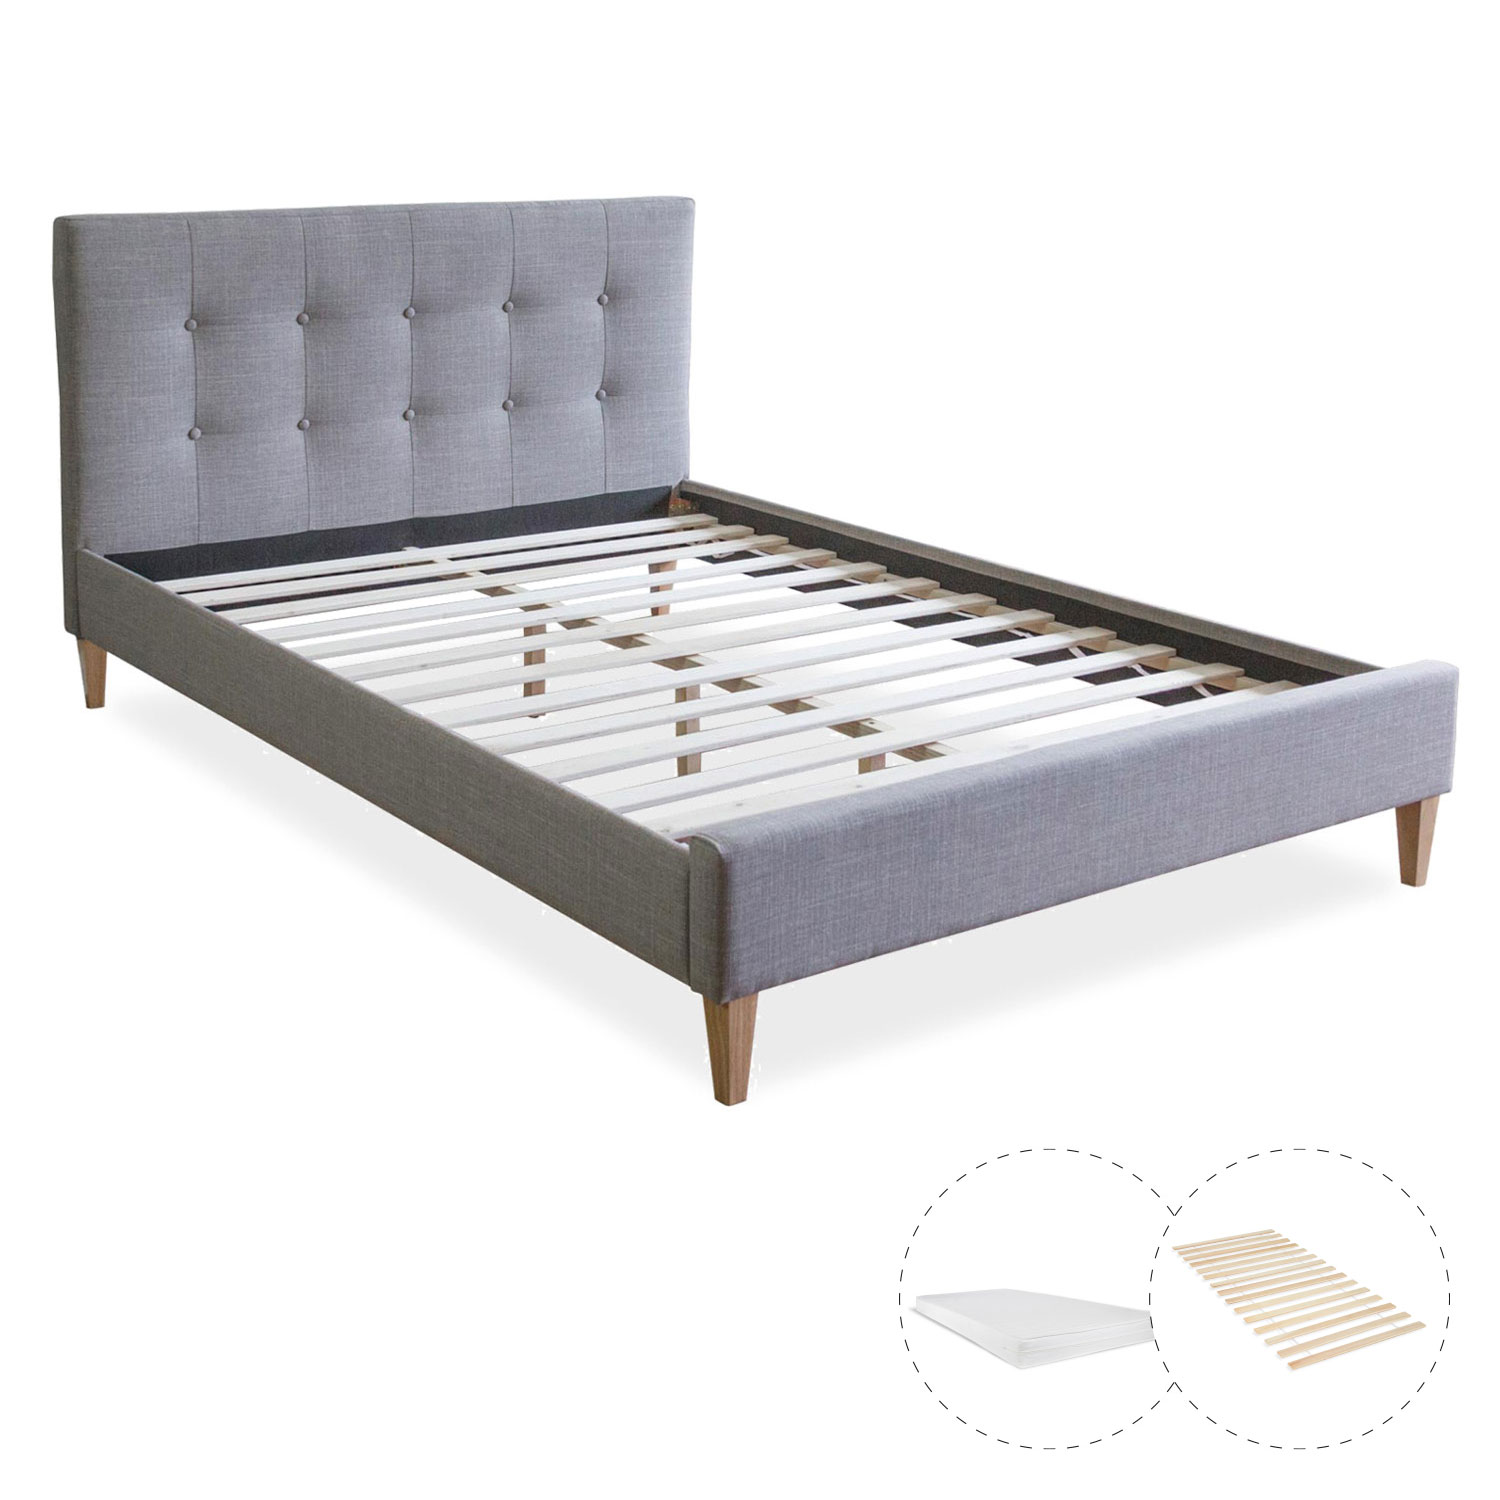 Upholstered Bed with Mattress 120x200 Slatted Frame Double Bed Fabric Bedstead Grey